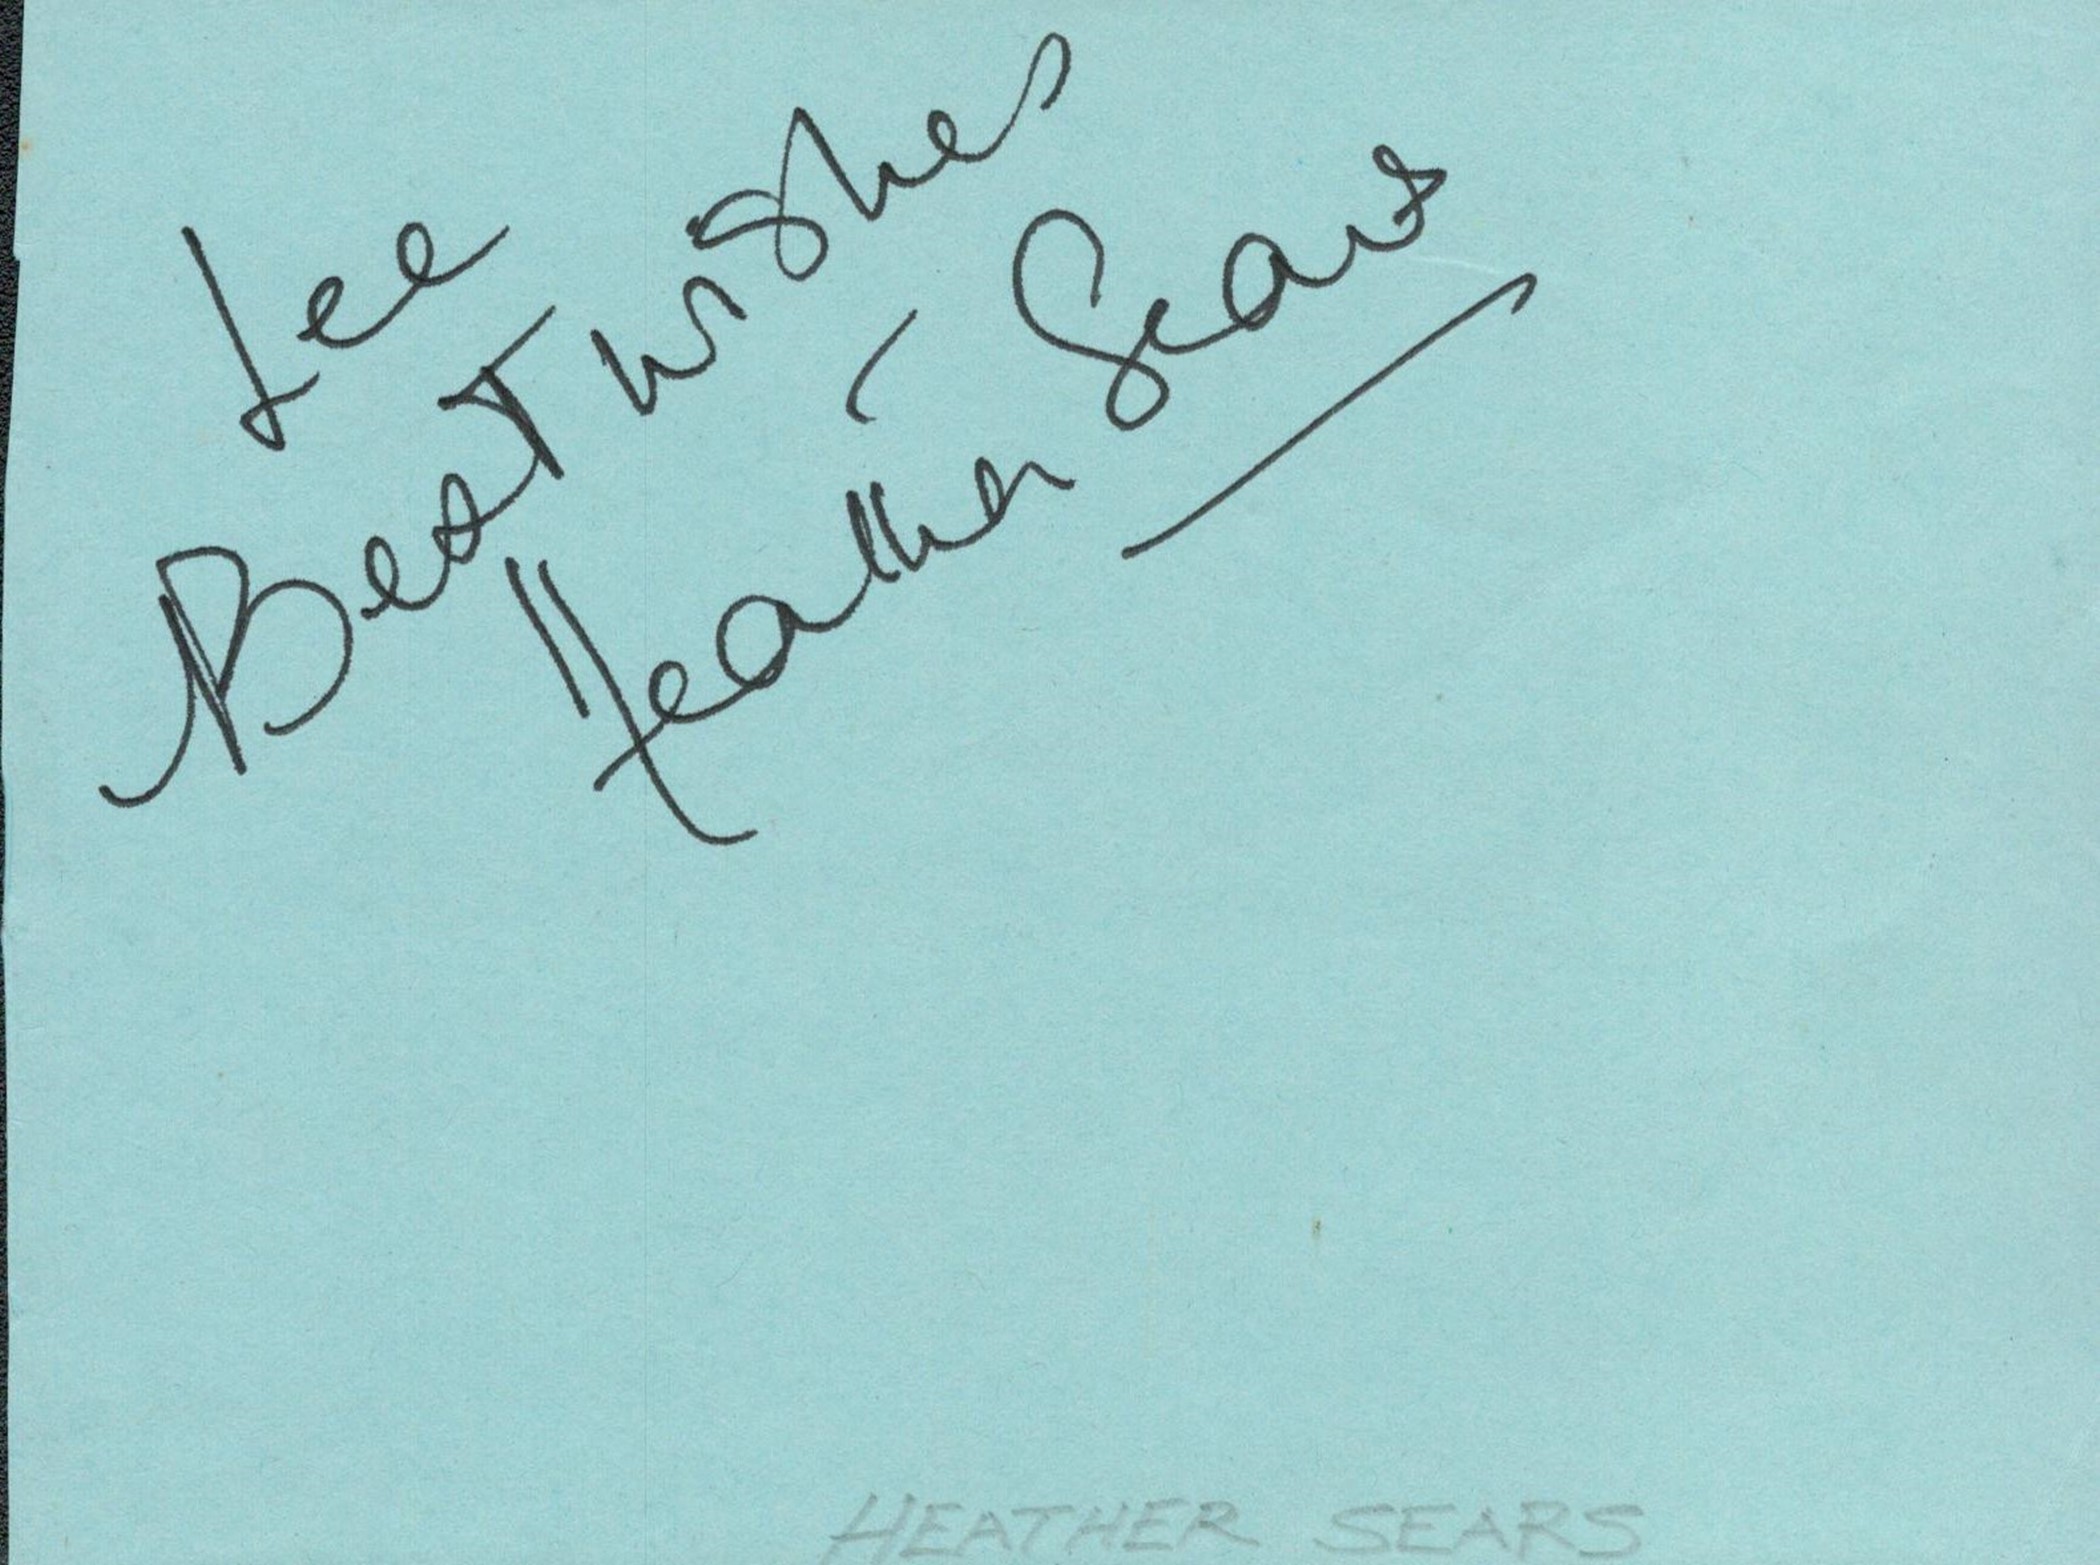 British Actress Heather Sears Signed Vintage Autograph Album Page. Dedicated to Lee. Good condition.